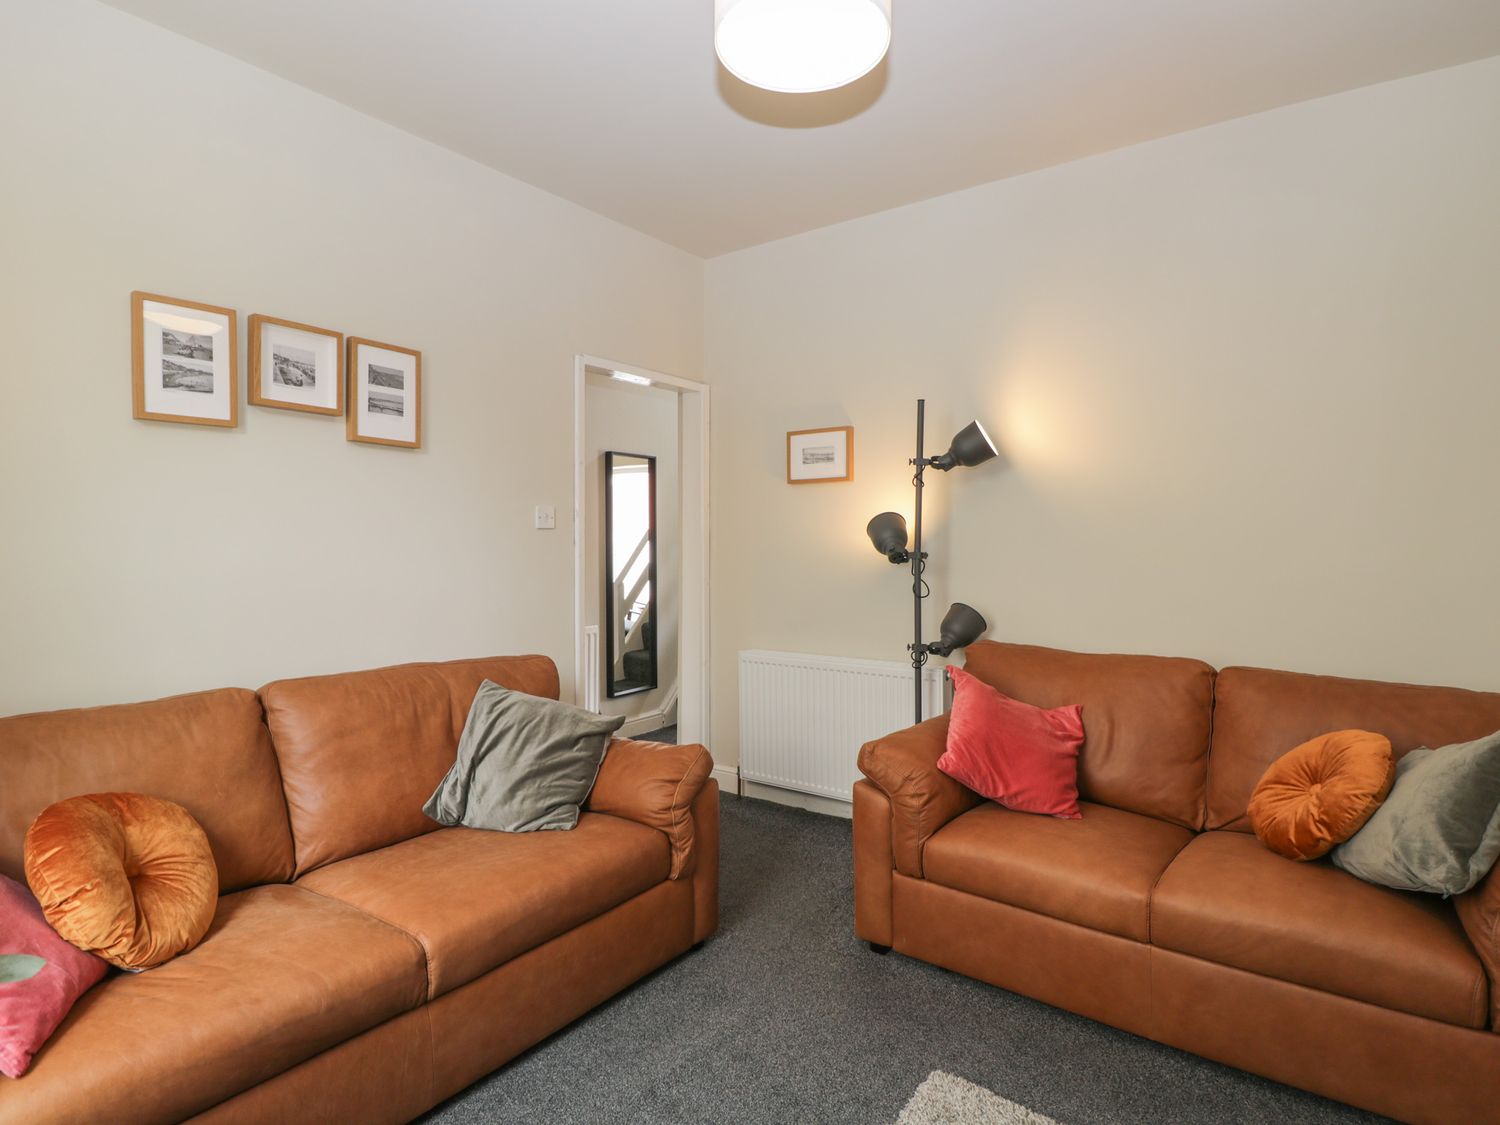 North Harbour House, Weymouth, Dorset. Three-storey. 3-bedrooms. Pet-friendly. Beach close. Hot tub.